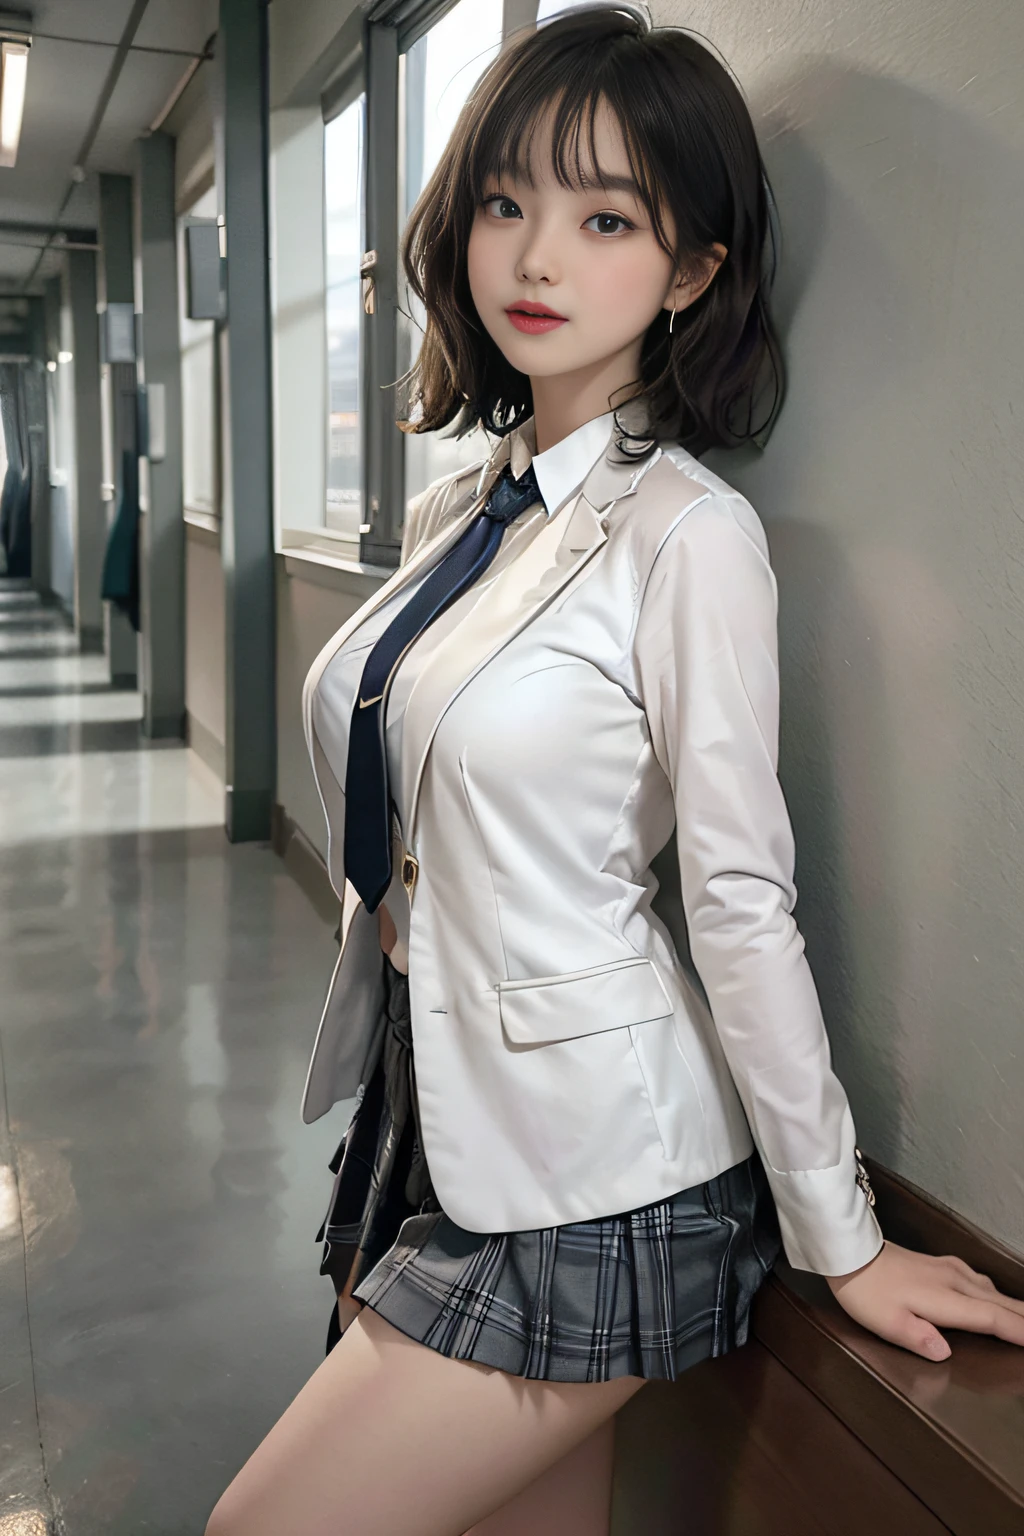 Best image quality, RAW photos, ultra-high resolution, taken from the side, gentle smile, 16-year-old Korean, very big breasts, fair skin, shiny white skin, short bob, bright silver hair, neatly aligned bangs, blazer, tie, ribbon, , collared shirt, plaid skirt, beautiful eyes, beautiful eyes of random colors, very thin lips, beautiful eyes with details, elongated eyes, pale pink blush, long eyelashes, beautiful double eyelids, eyeshadow, beautiful thin legs, beautiful constrictions, earrings, necklaces, leaning against the wall of school, hallway, corridor